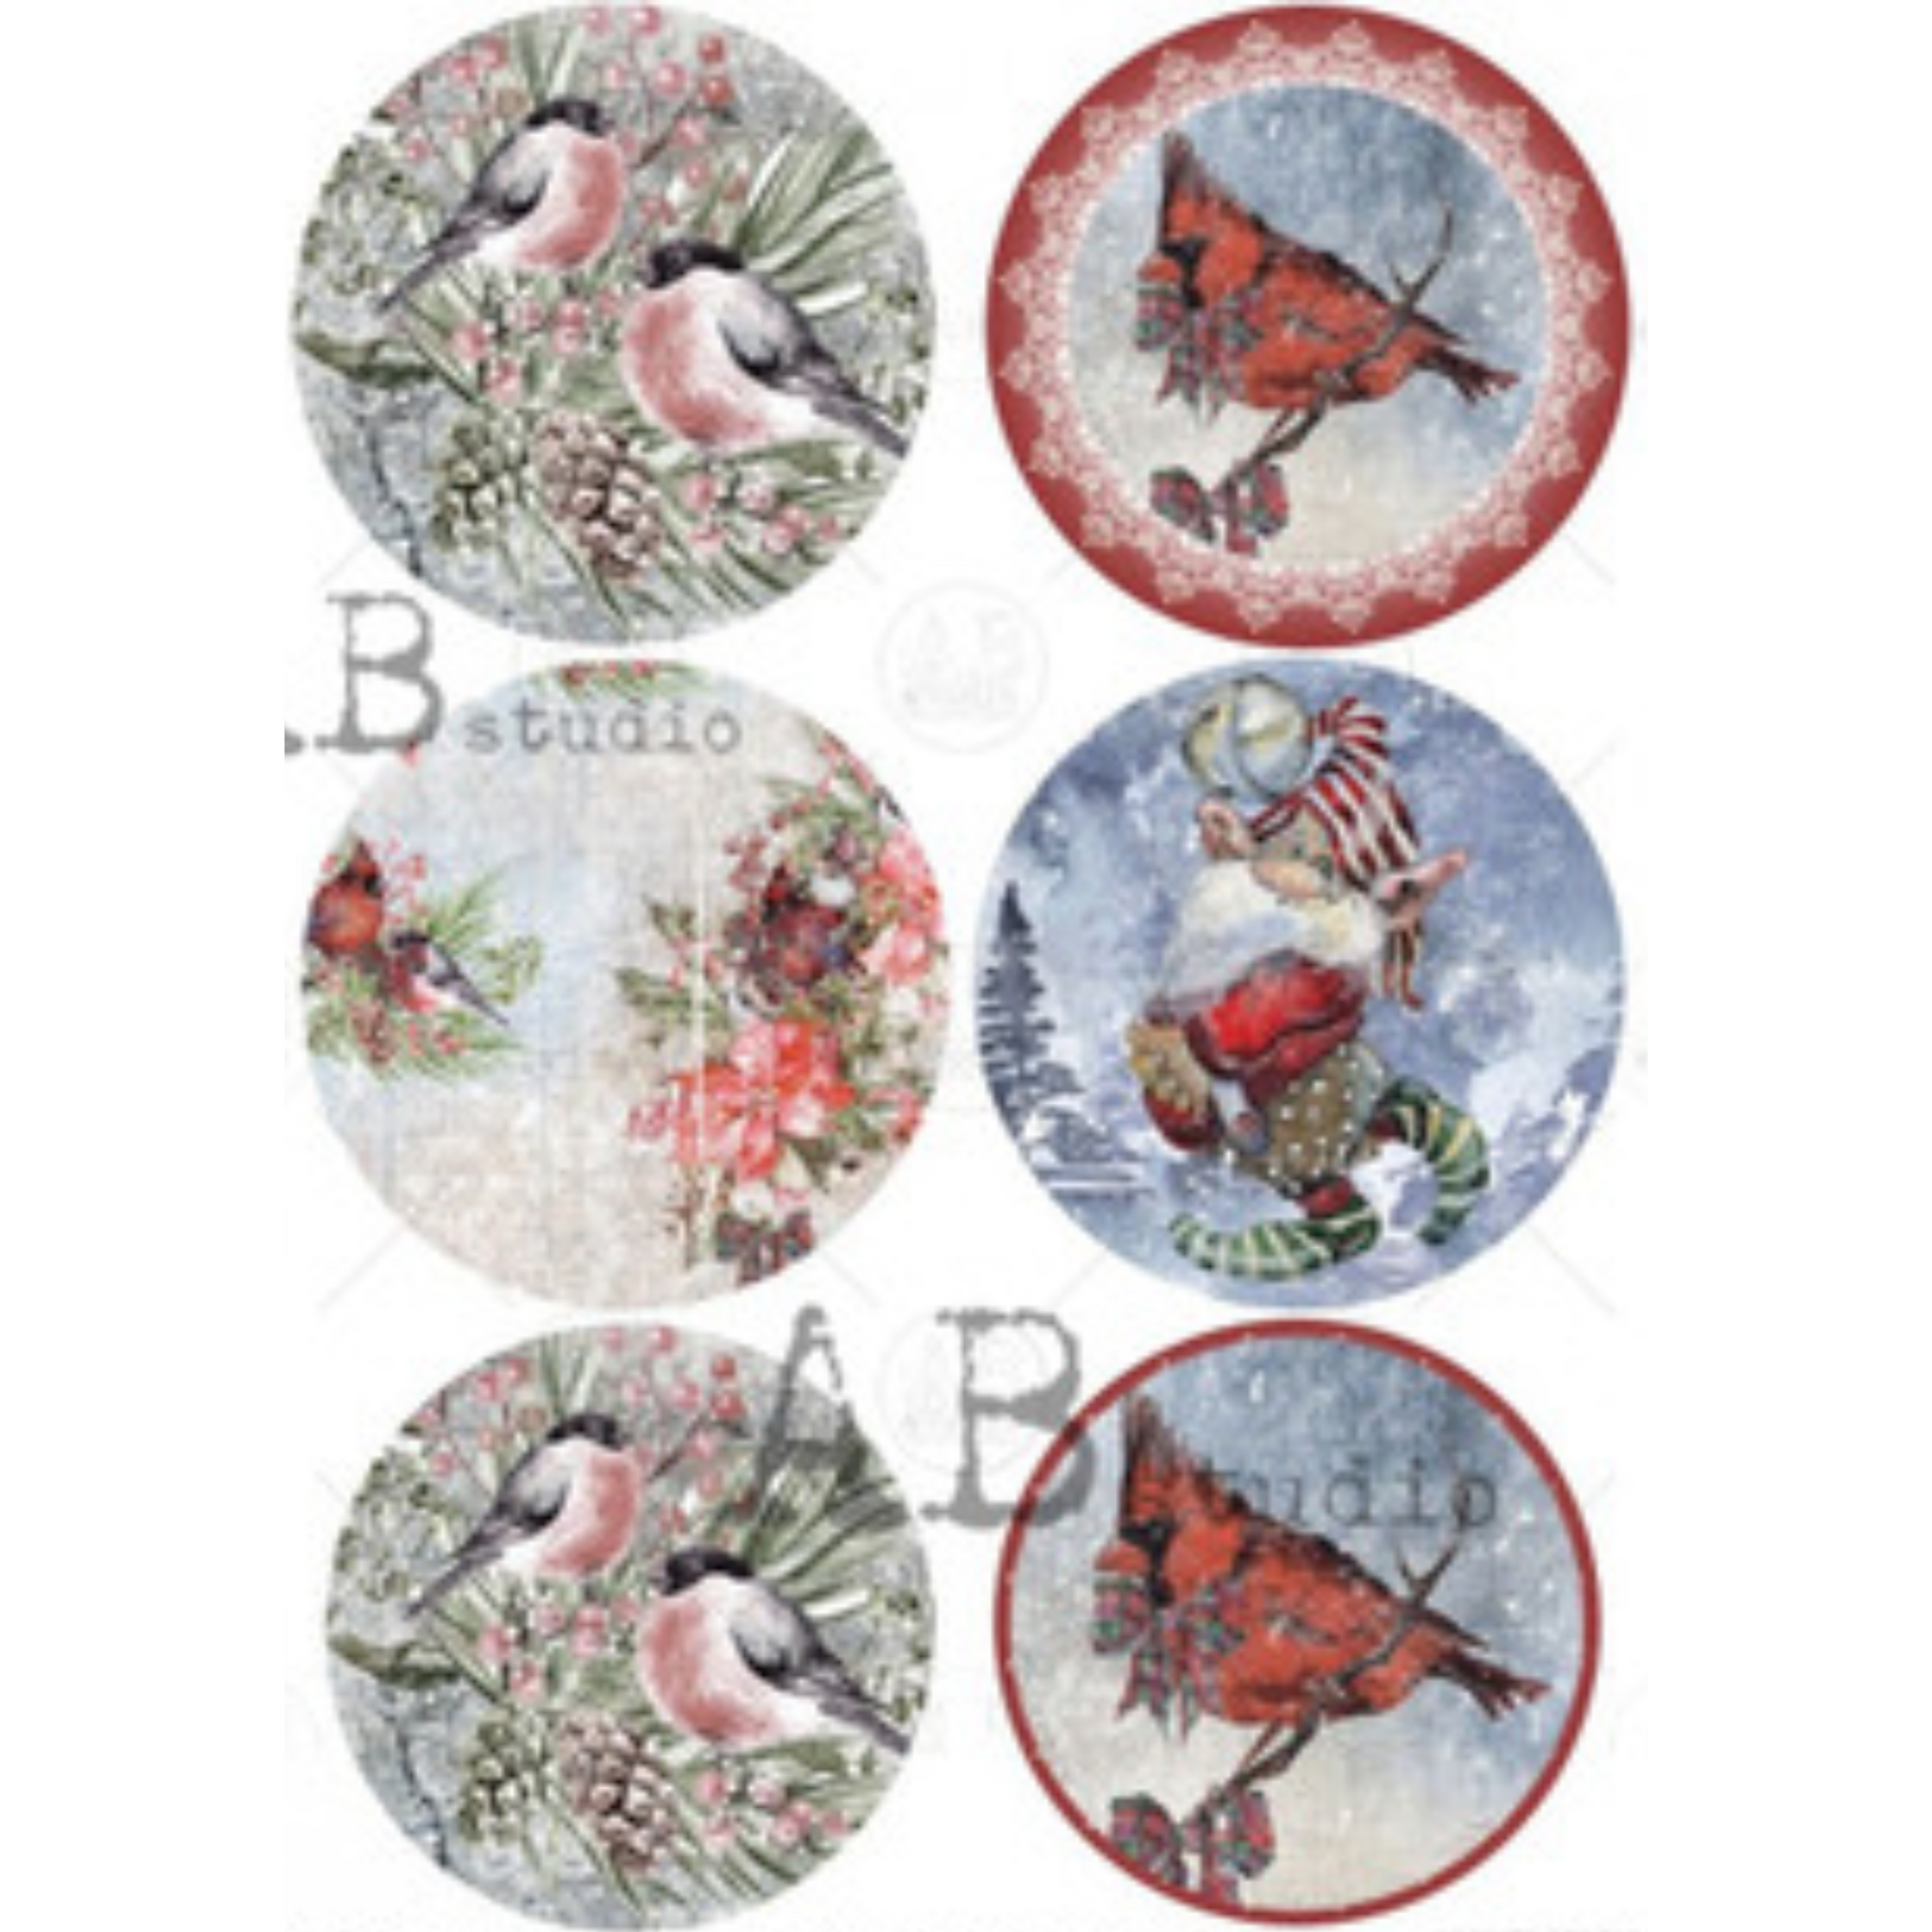 "Bird Ornament Rounds" decoupage rice paper by AB Studio. Size A4 available at Milton's Daughter.